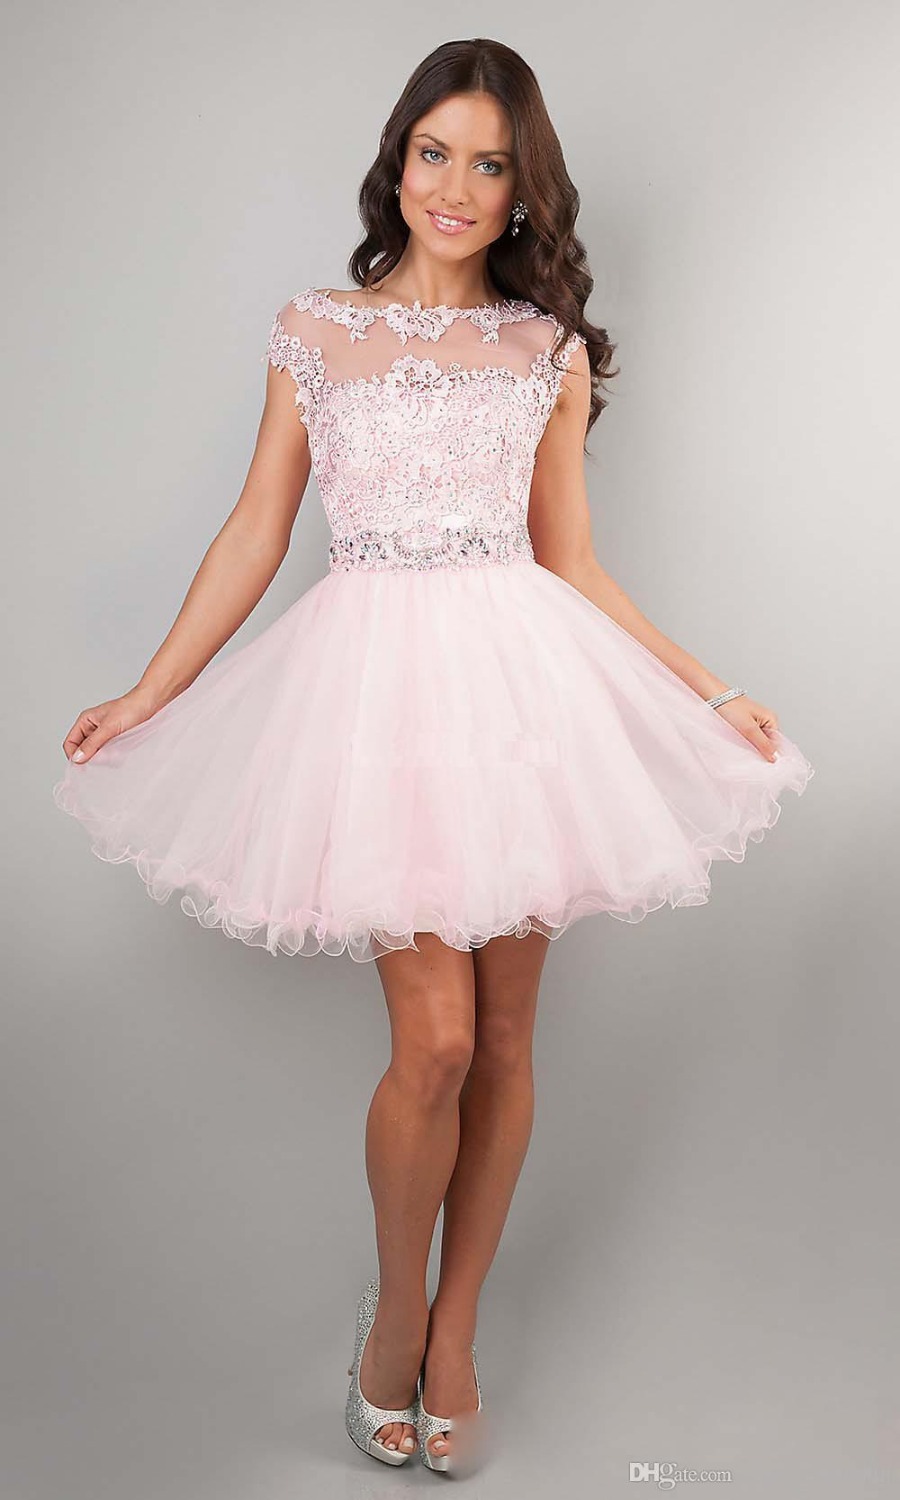 Collection Cute Cheap Formal Dresses Pictures - Reikian